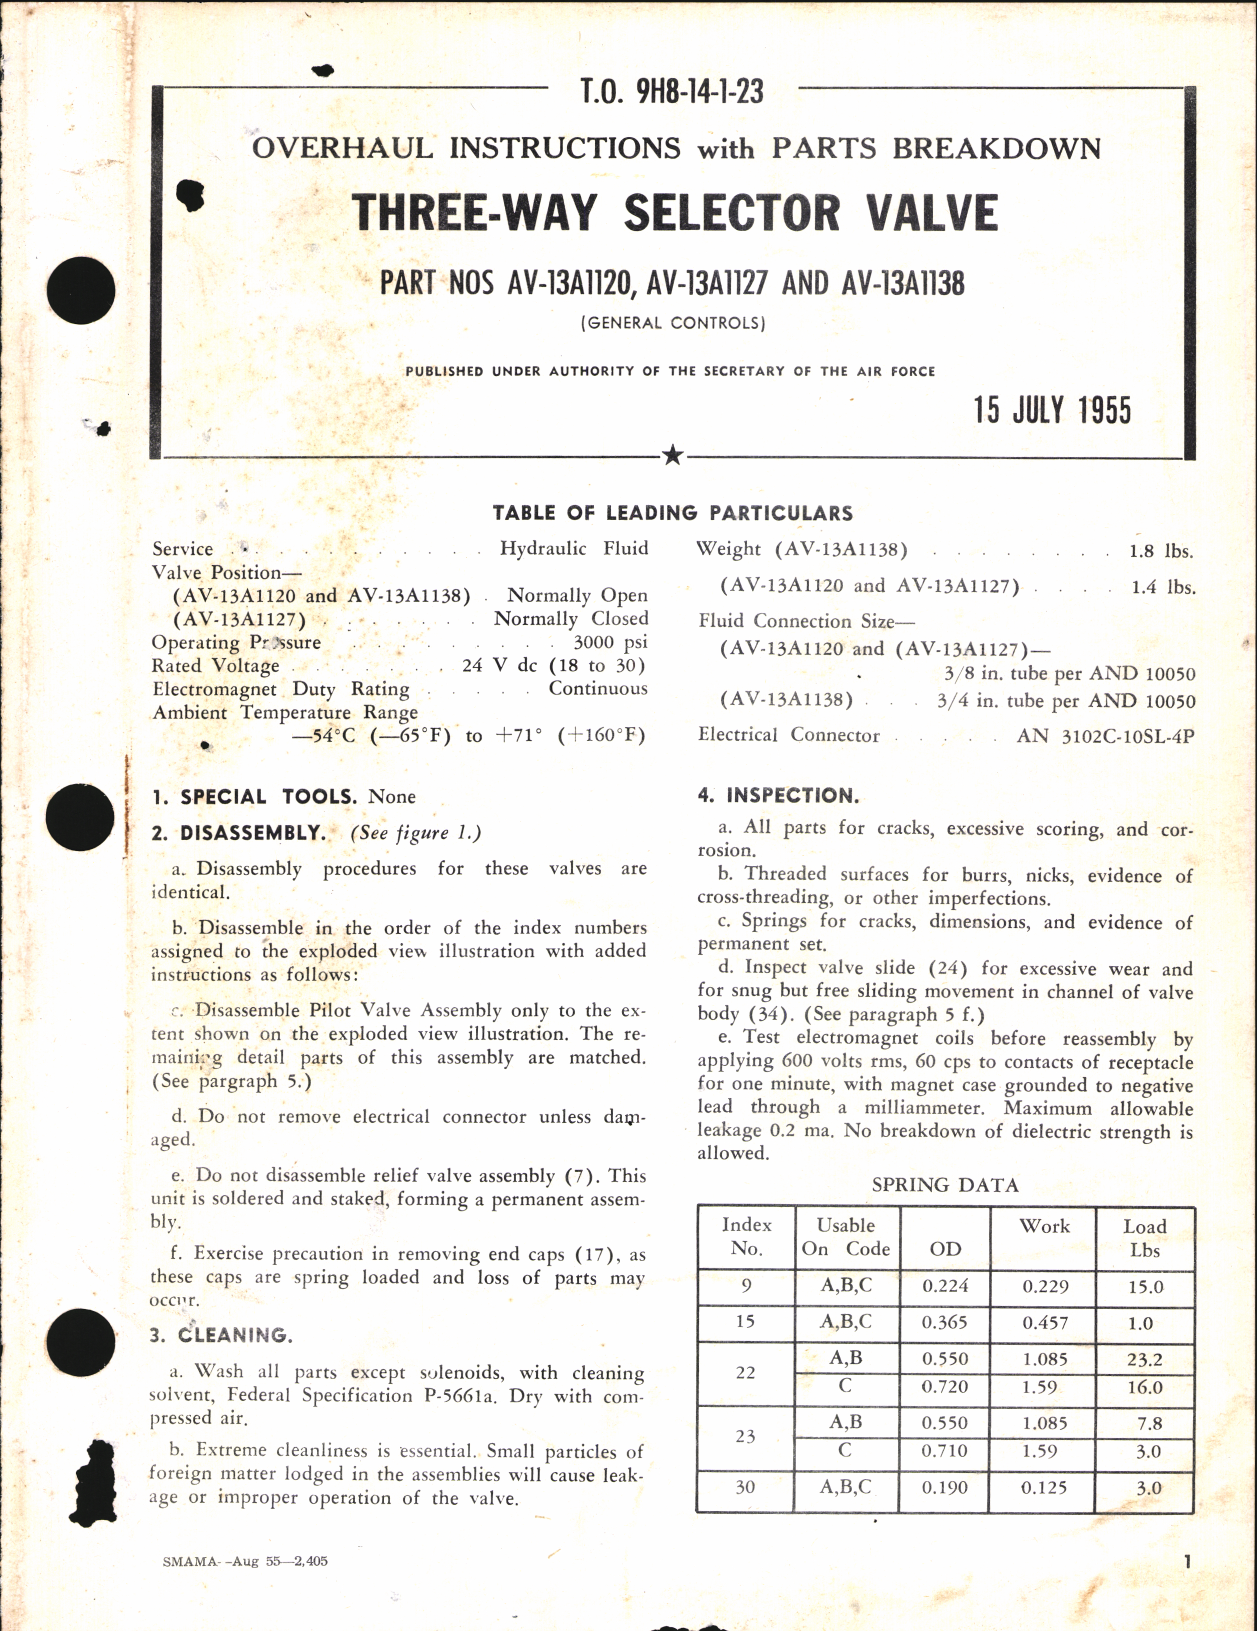 Sample page 1 from AirCorps Library document: Overhaul Instructions with Parts Breakdown for Three-Way Selector Valve 